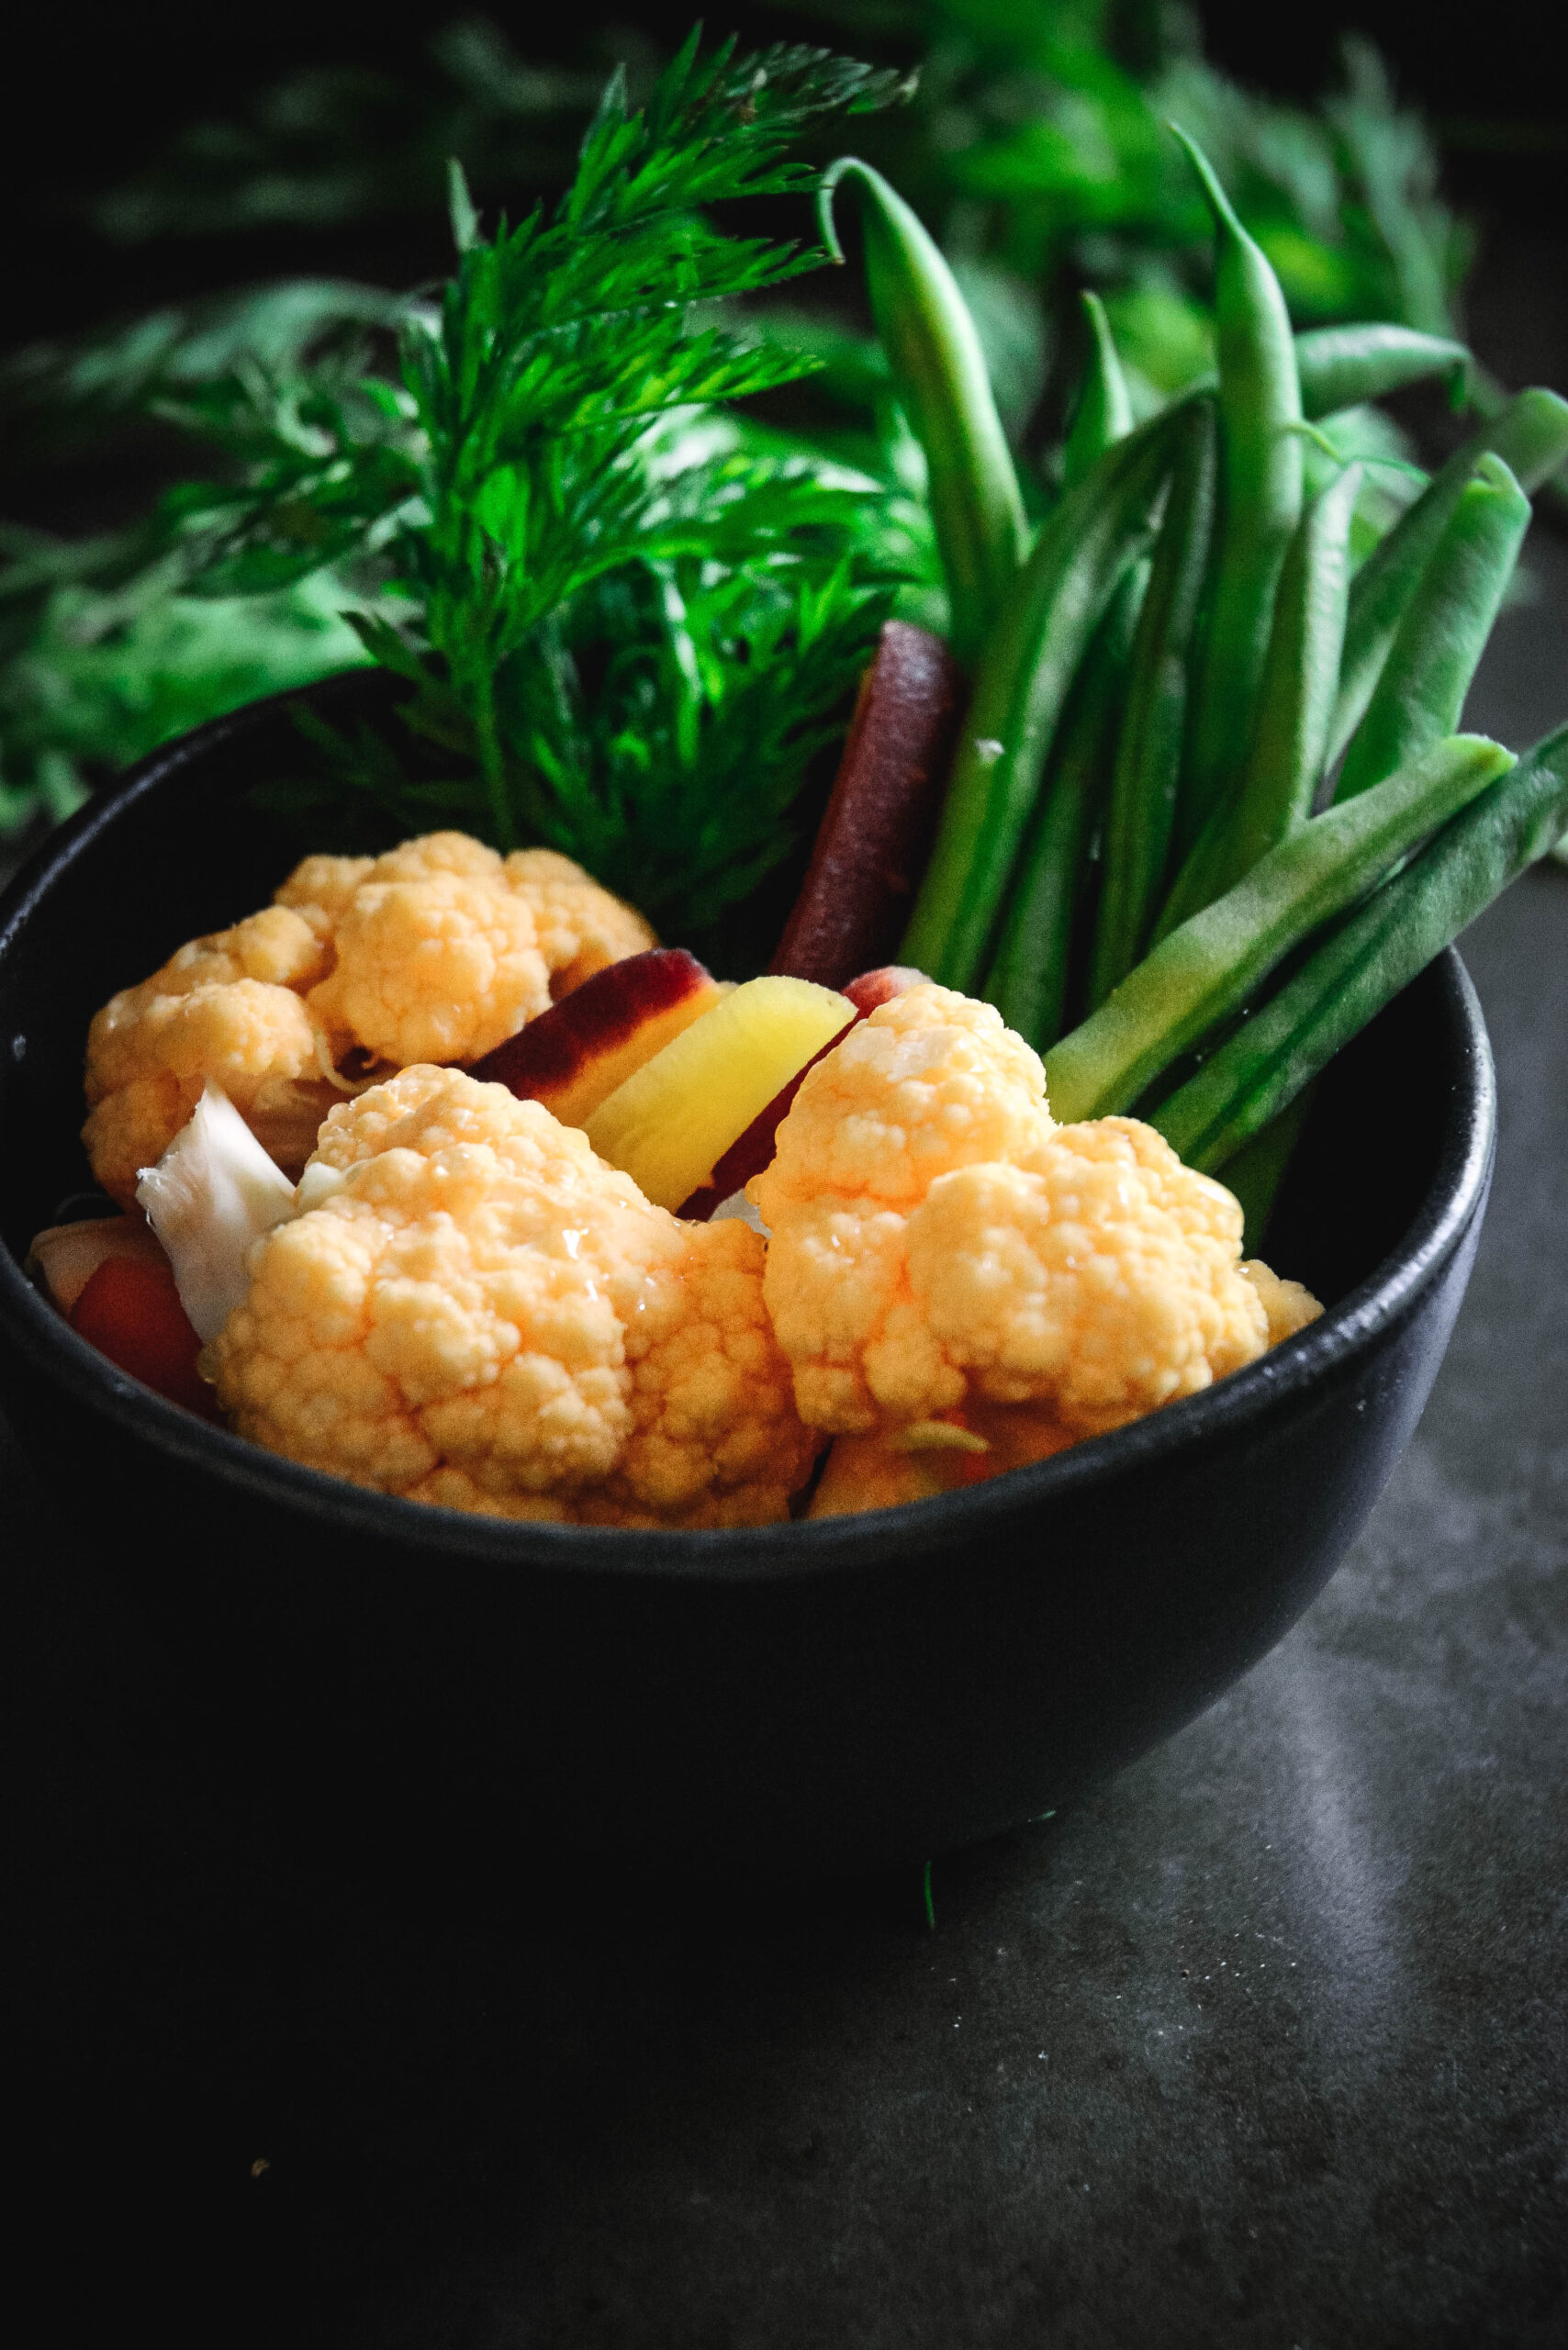 cauliflower, green beans, carrots and carrot tops in a small black bowl